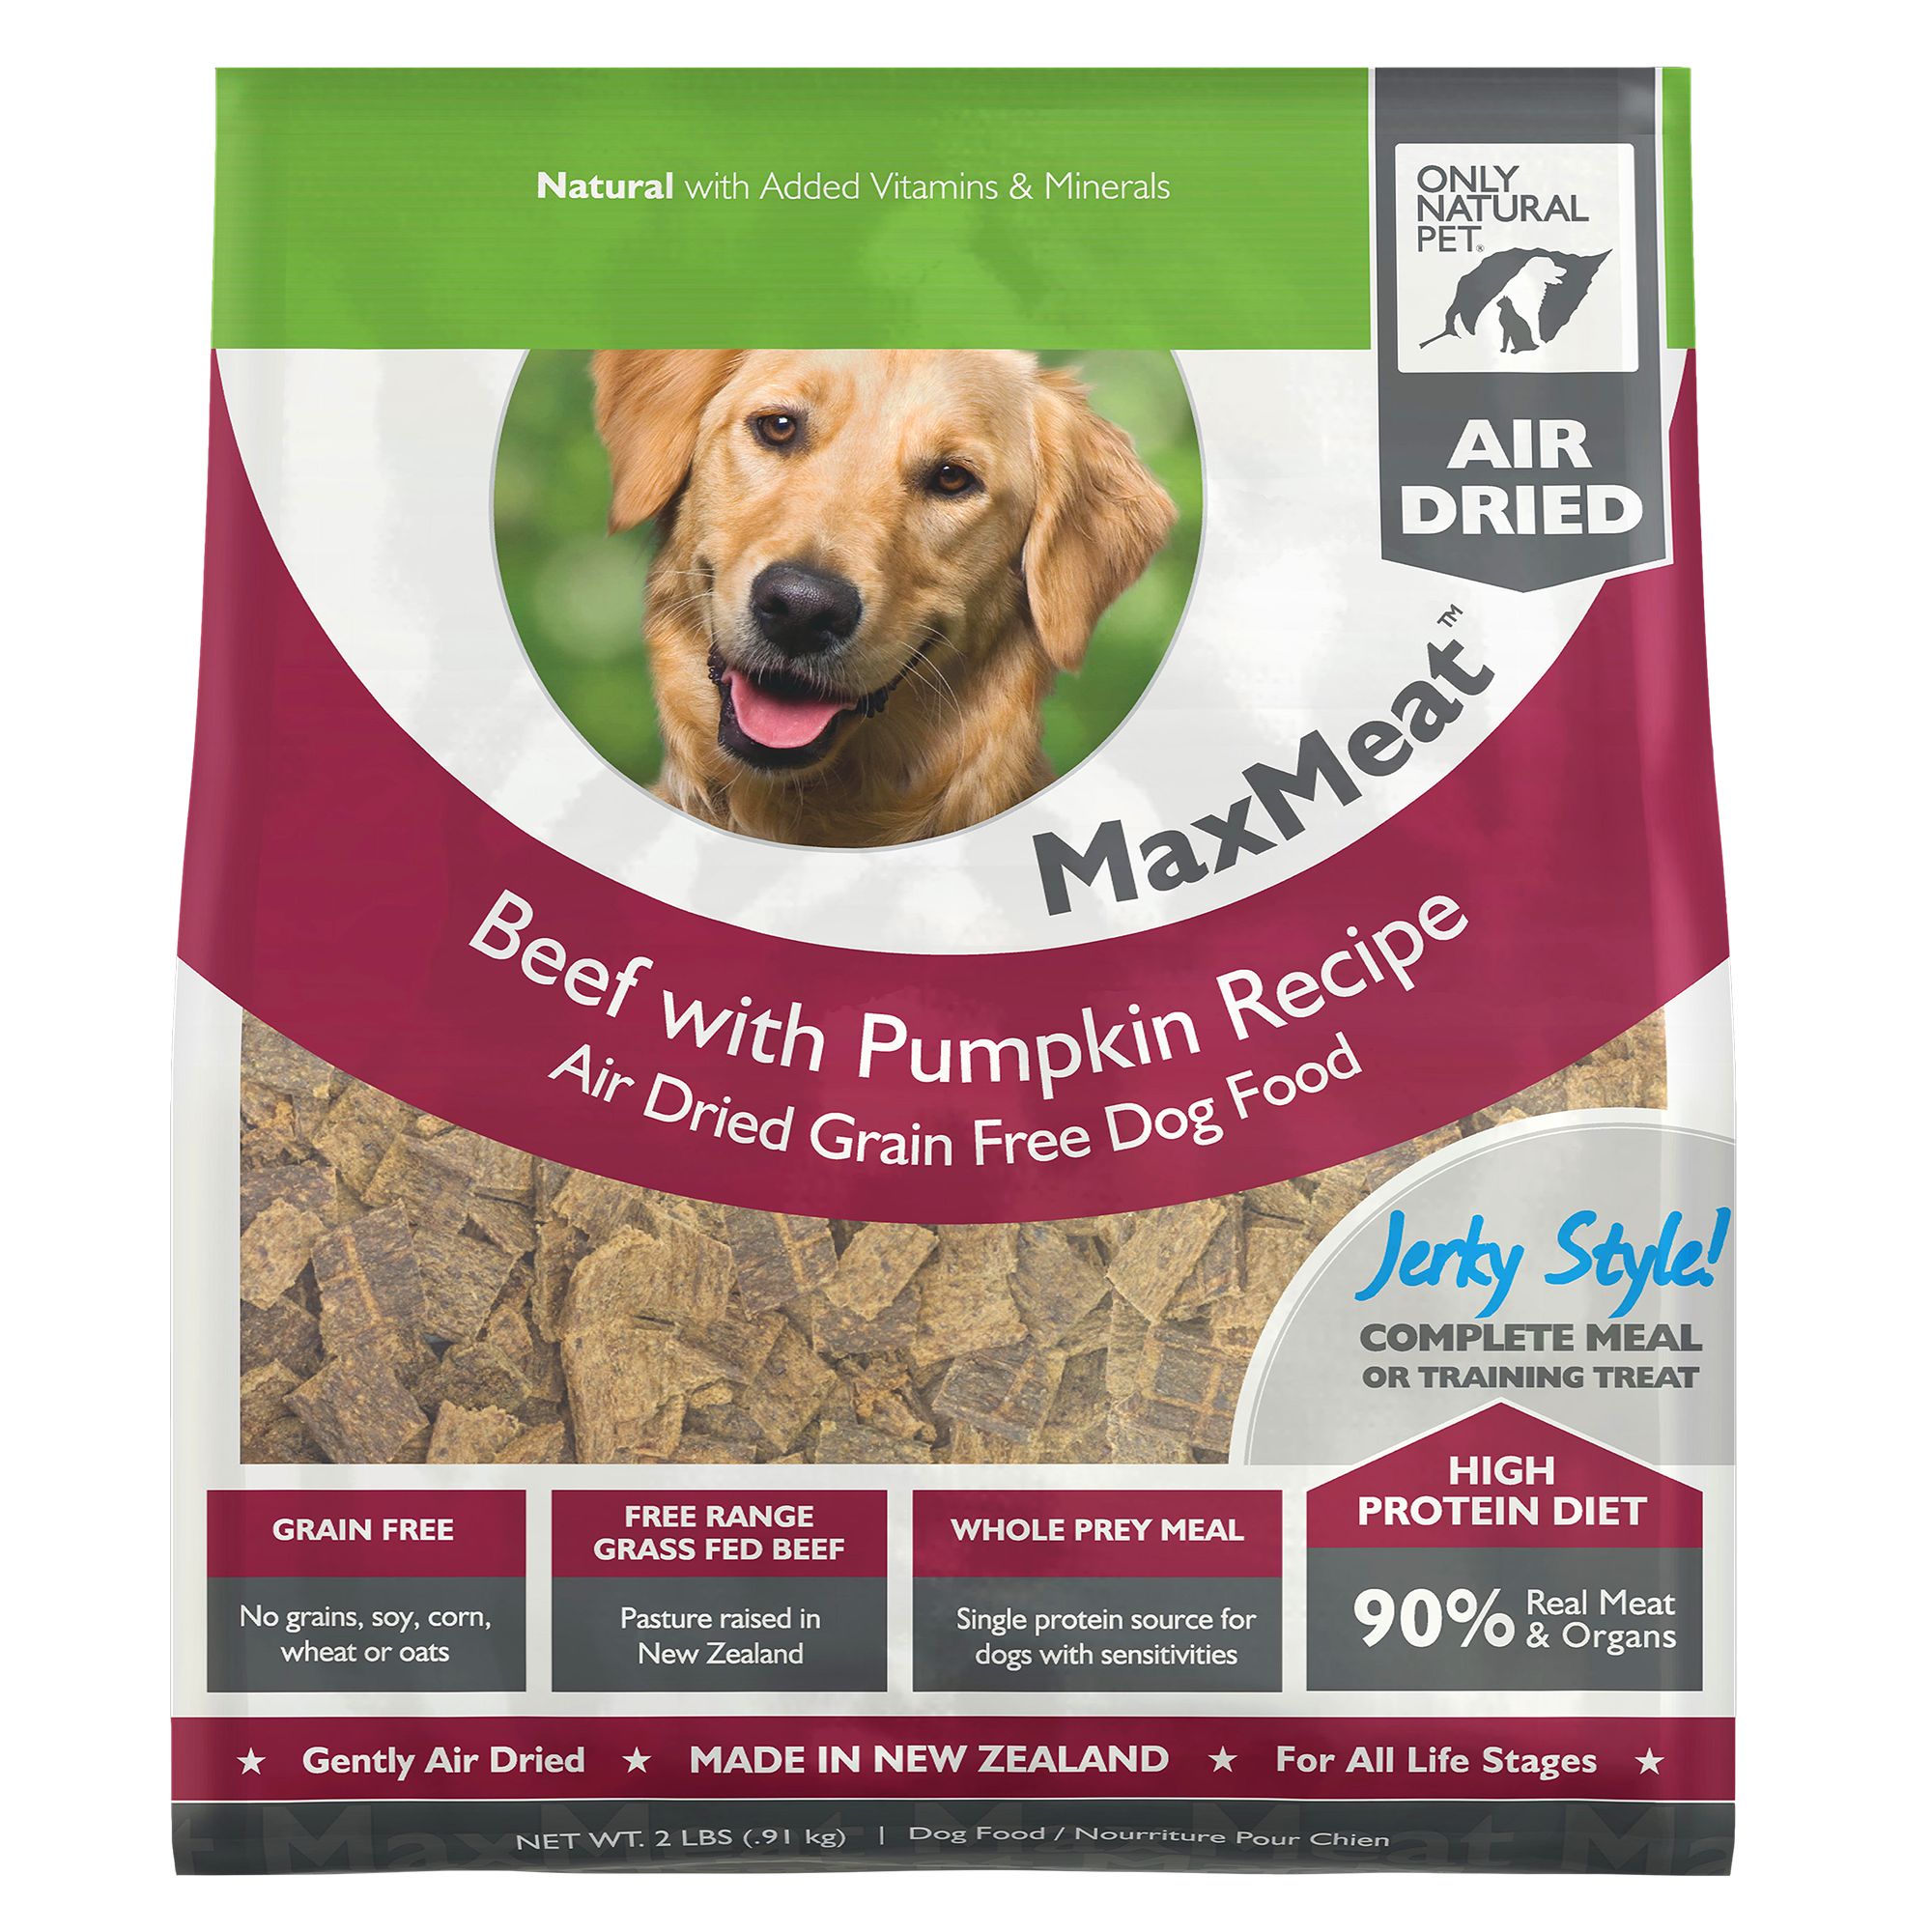 Only Natural Pet® MaxMeat Dog Food 